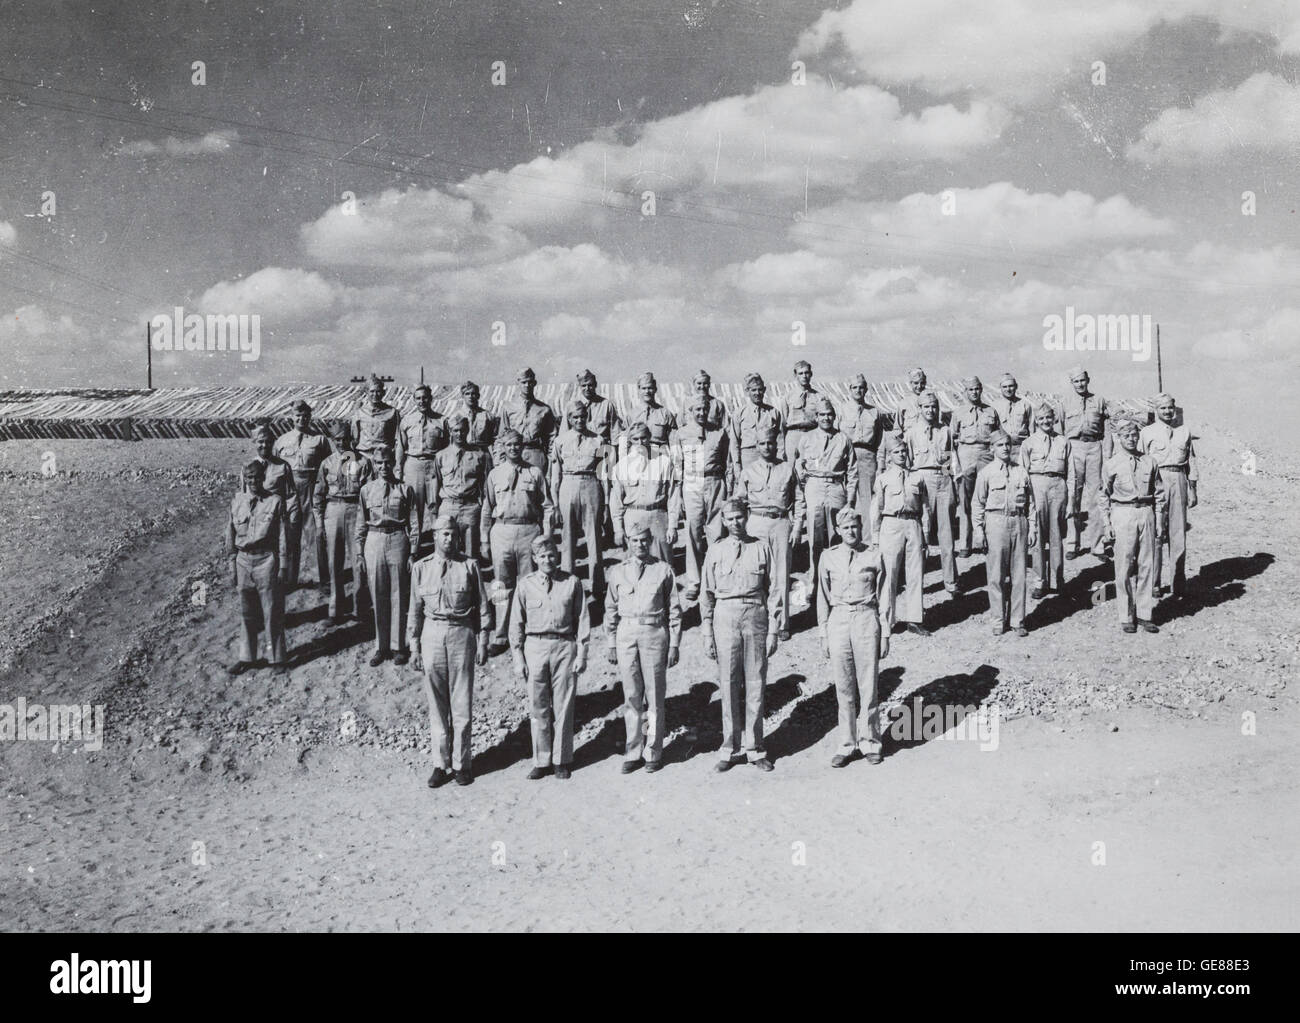 Vintage Photograph of Company A 850th Signal Corps, Camp Huckstep, Egypt, World War Two, 1944 Stock Photo